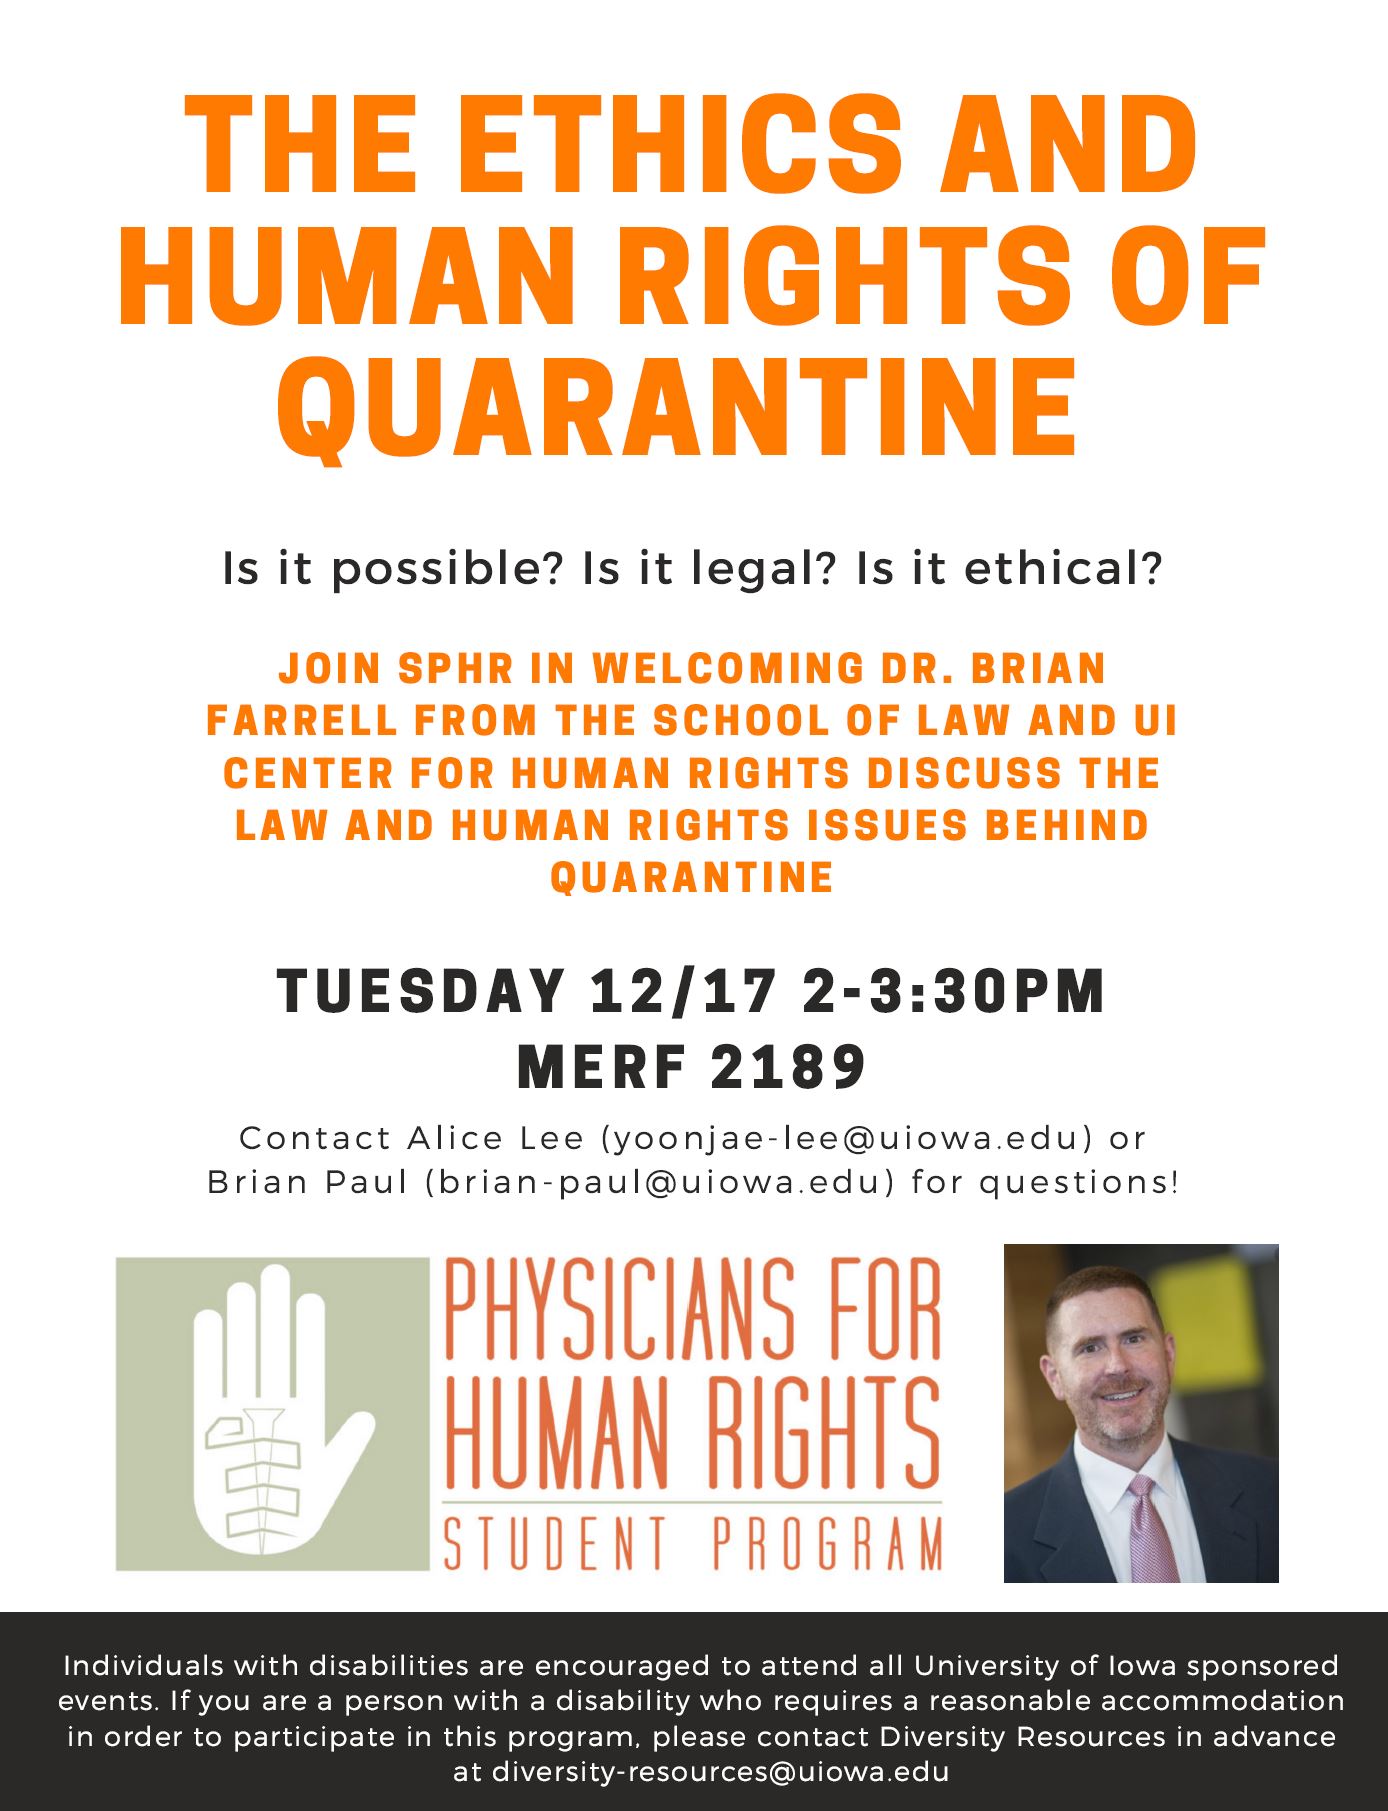 The Ethics and Human Rights of Quarantine promotional image